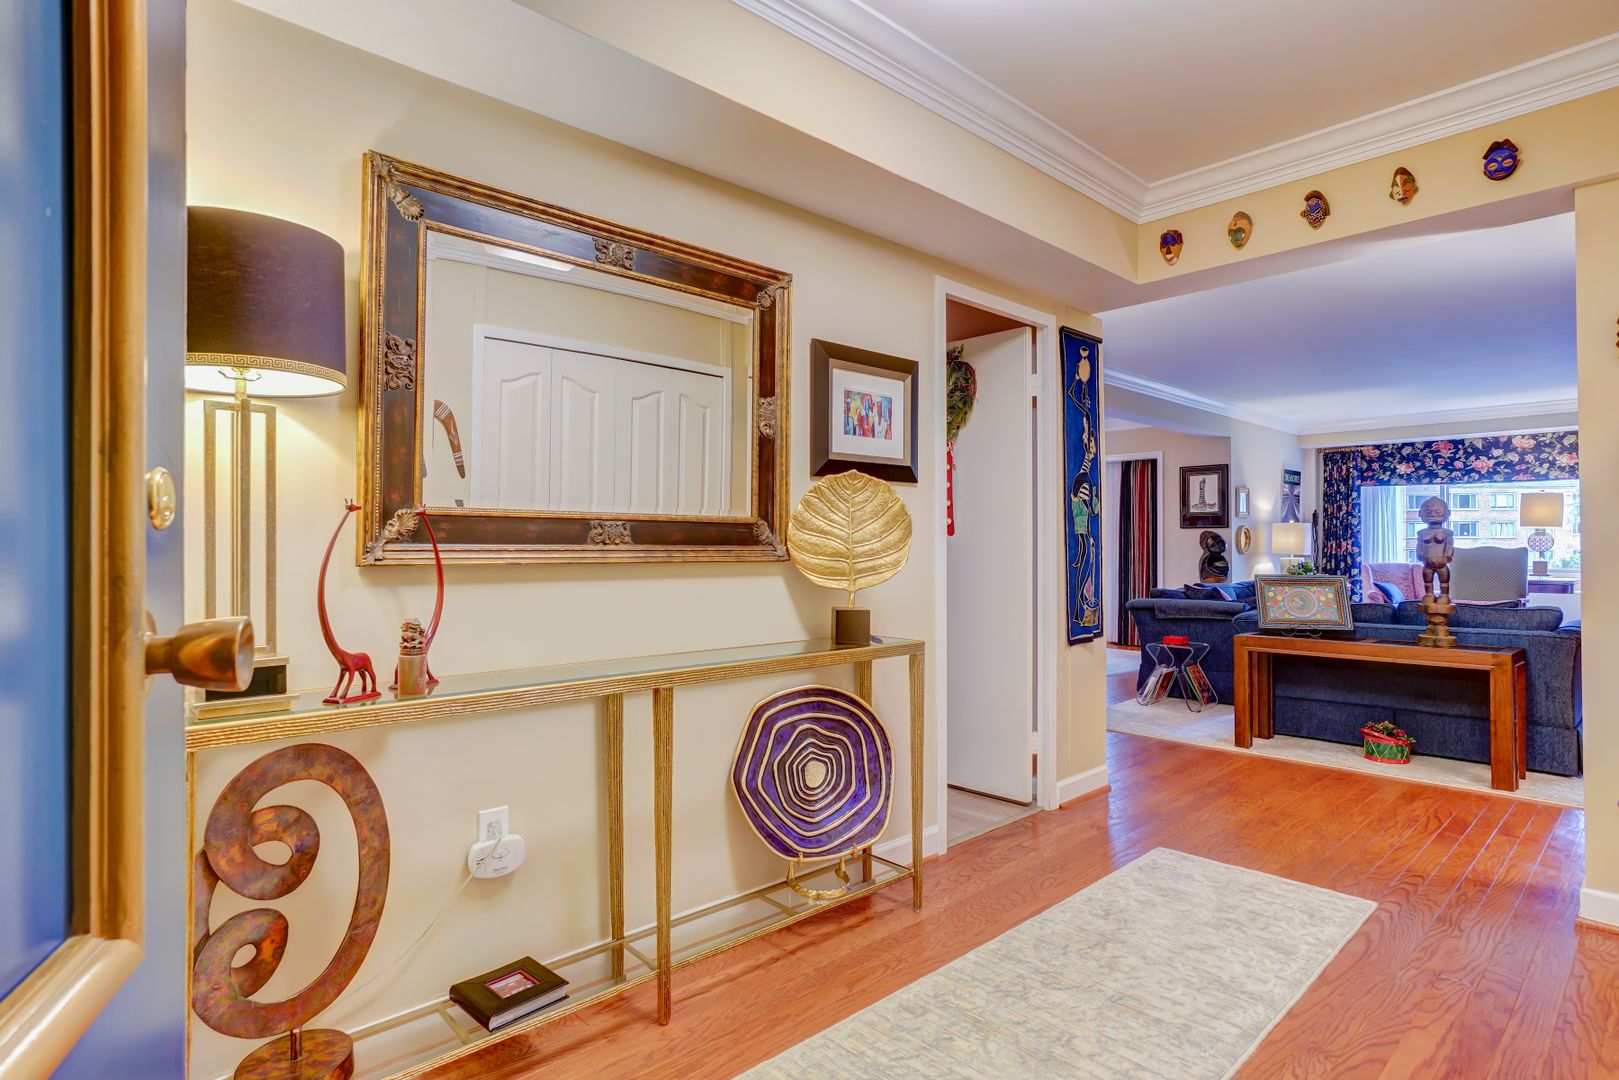 MUST SEE! Beautiful and spacious 3BR/2BA condo in one of DC's most sought-after neighborhoods!